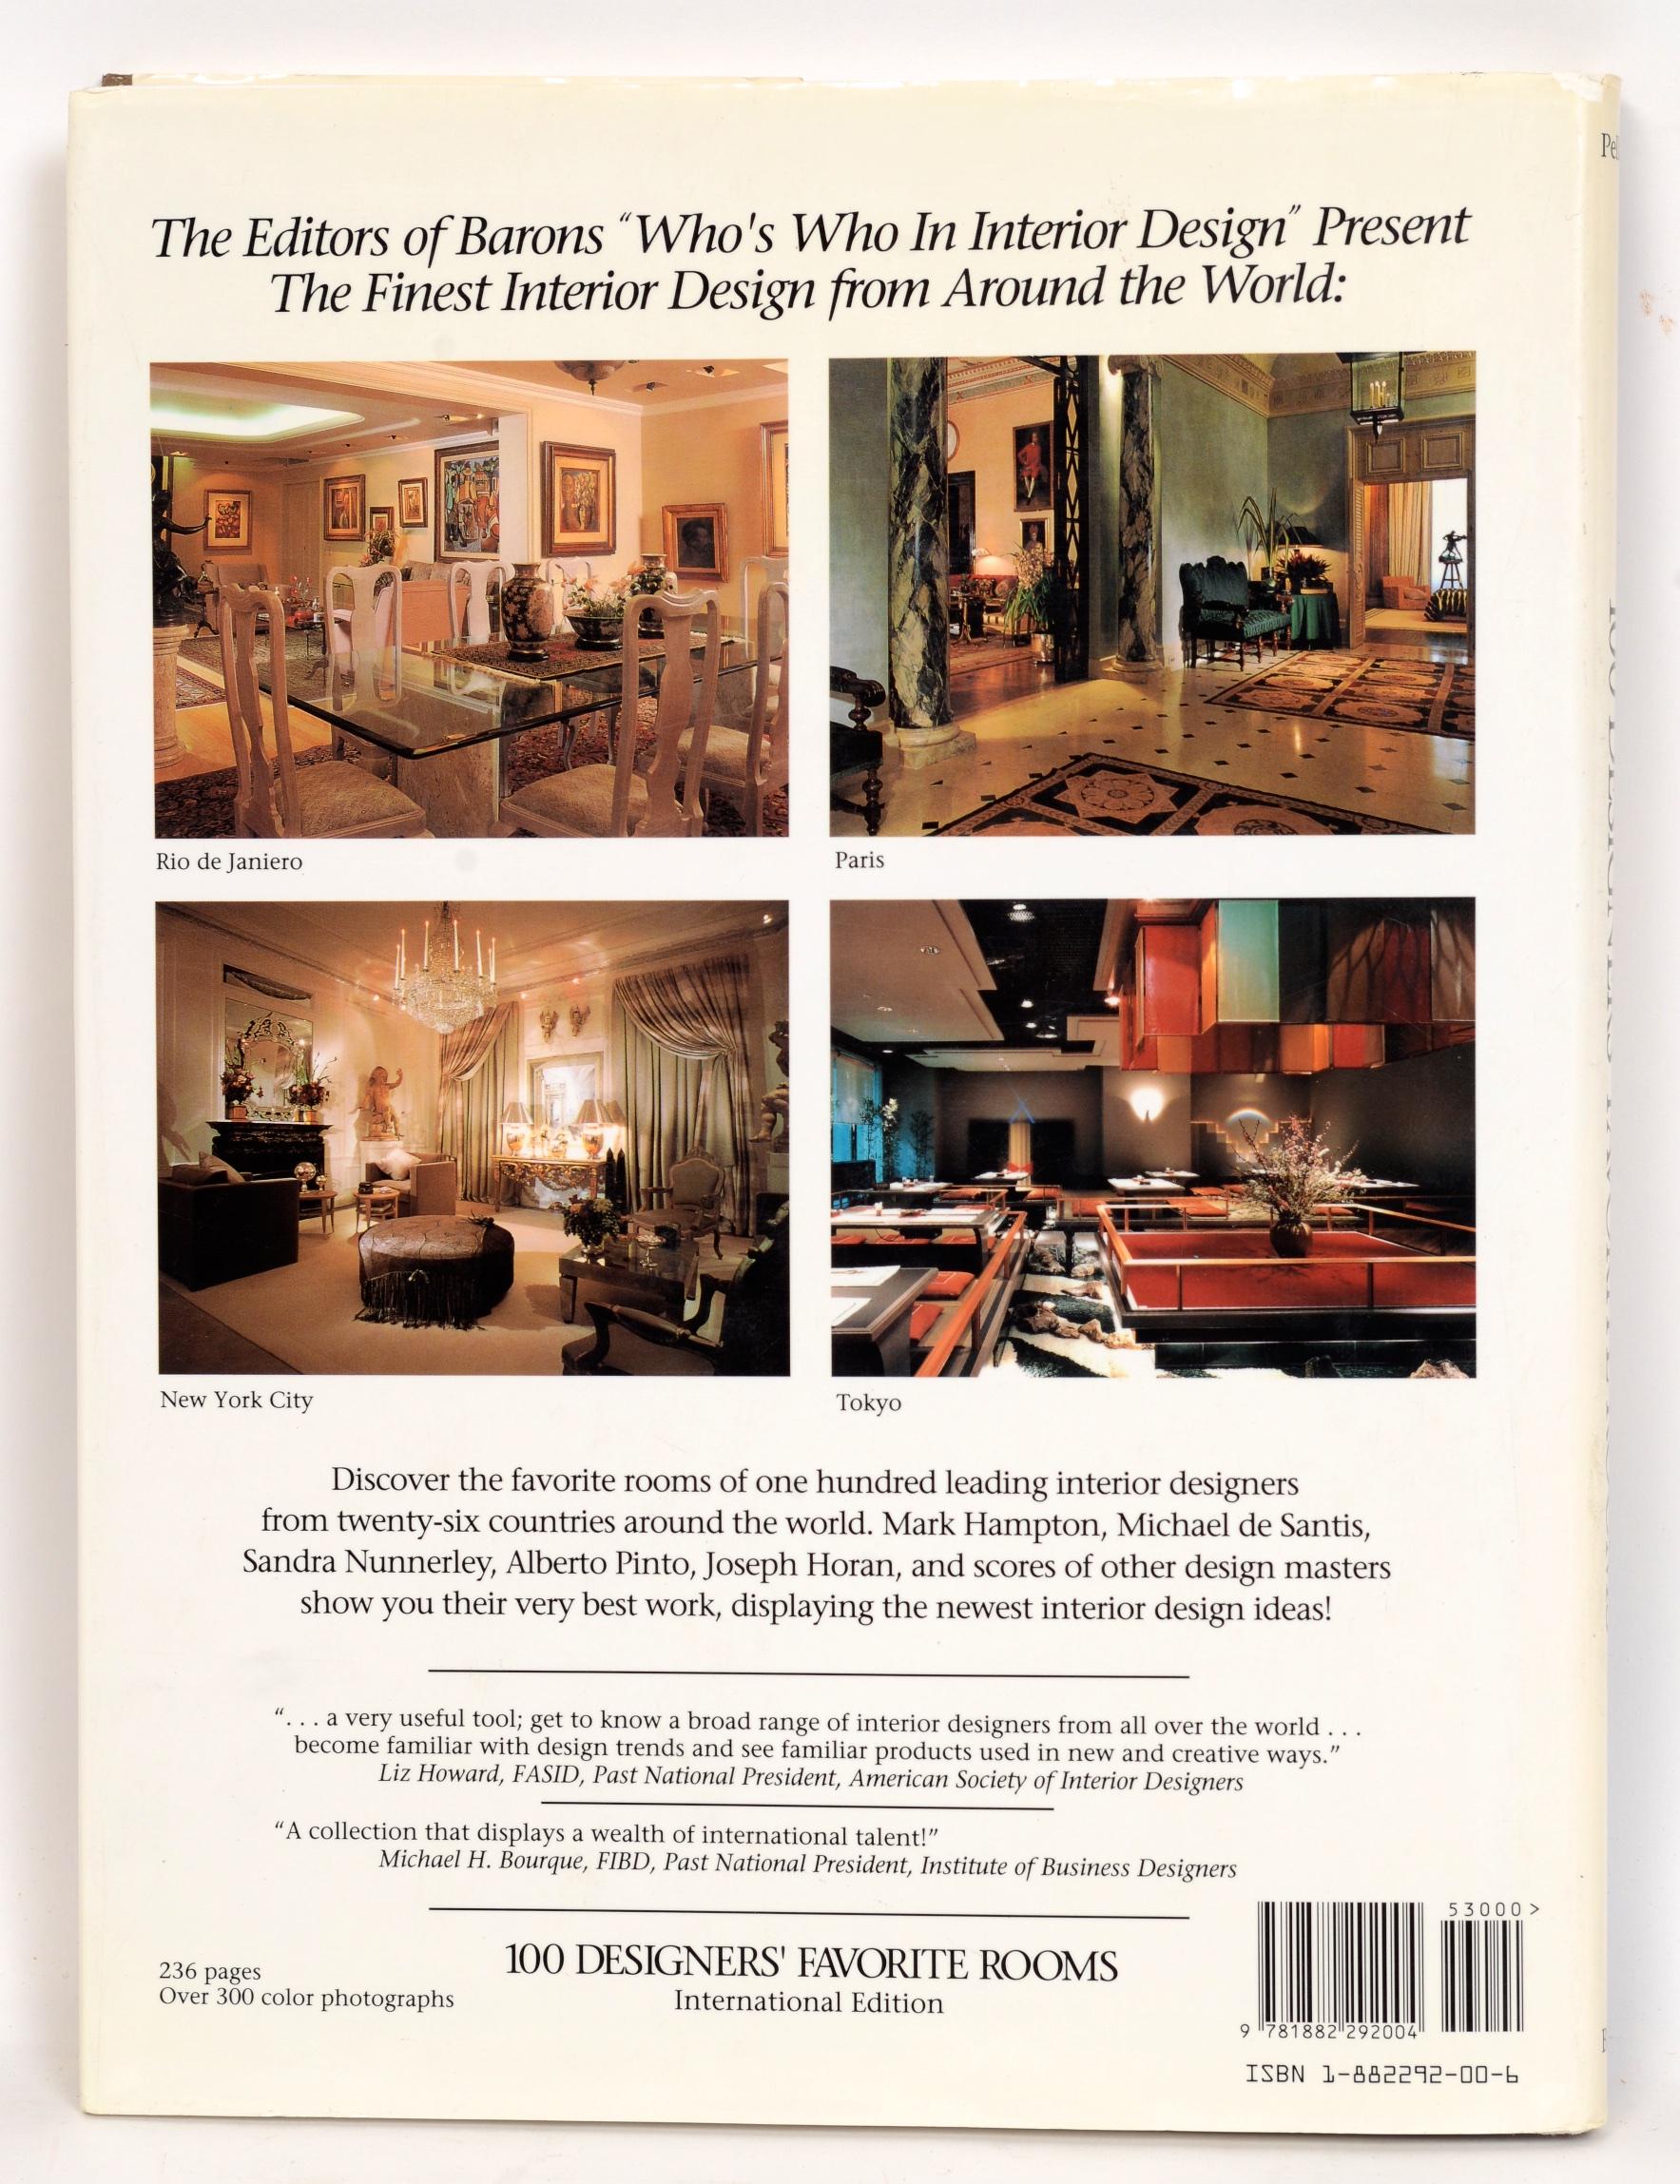 100 Designers' Favorite Rooms: Selected Projects of the World's Finest Designers and Architects by John L. Pellam. Barons Who's Who, 1993. 1st Ed hardcover with dust jacket. This book shows landmark projects from North America, Asia, Europe, and